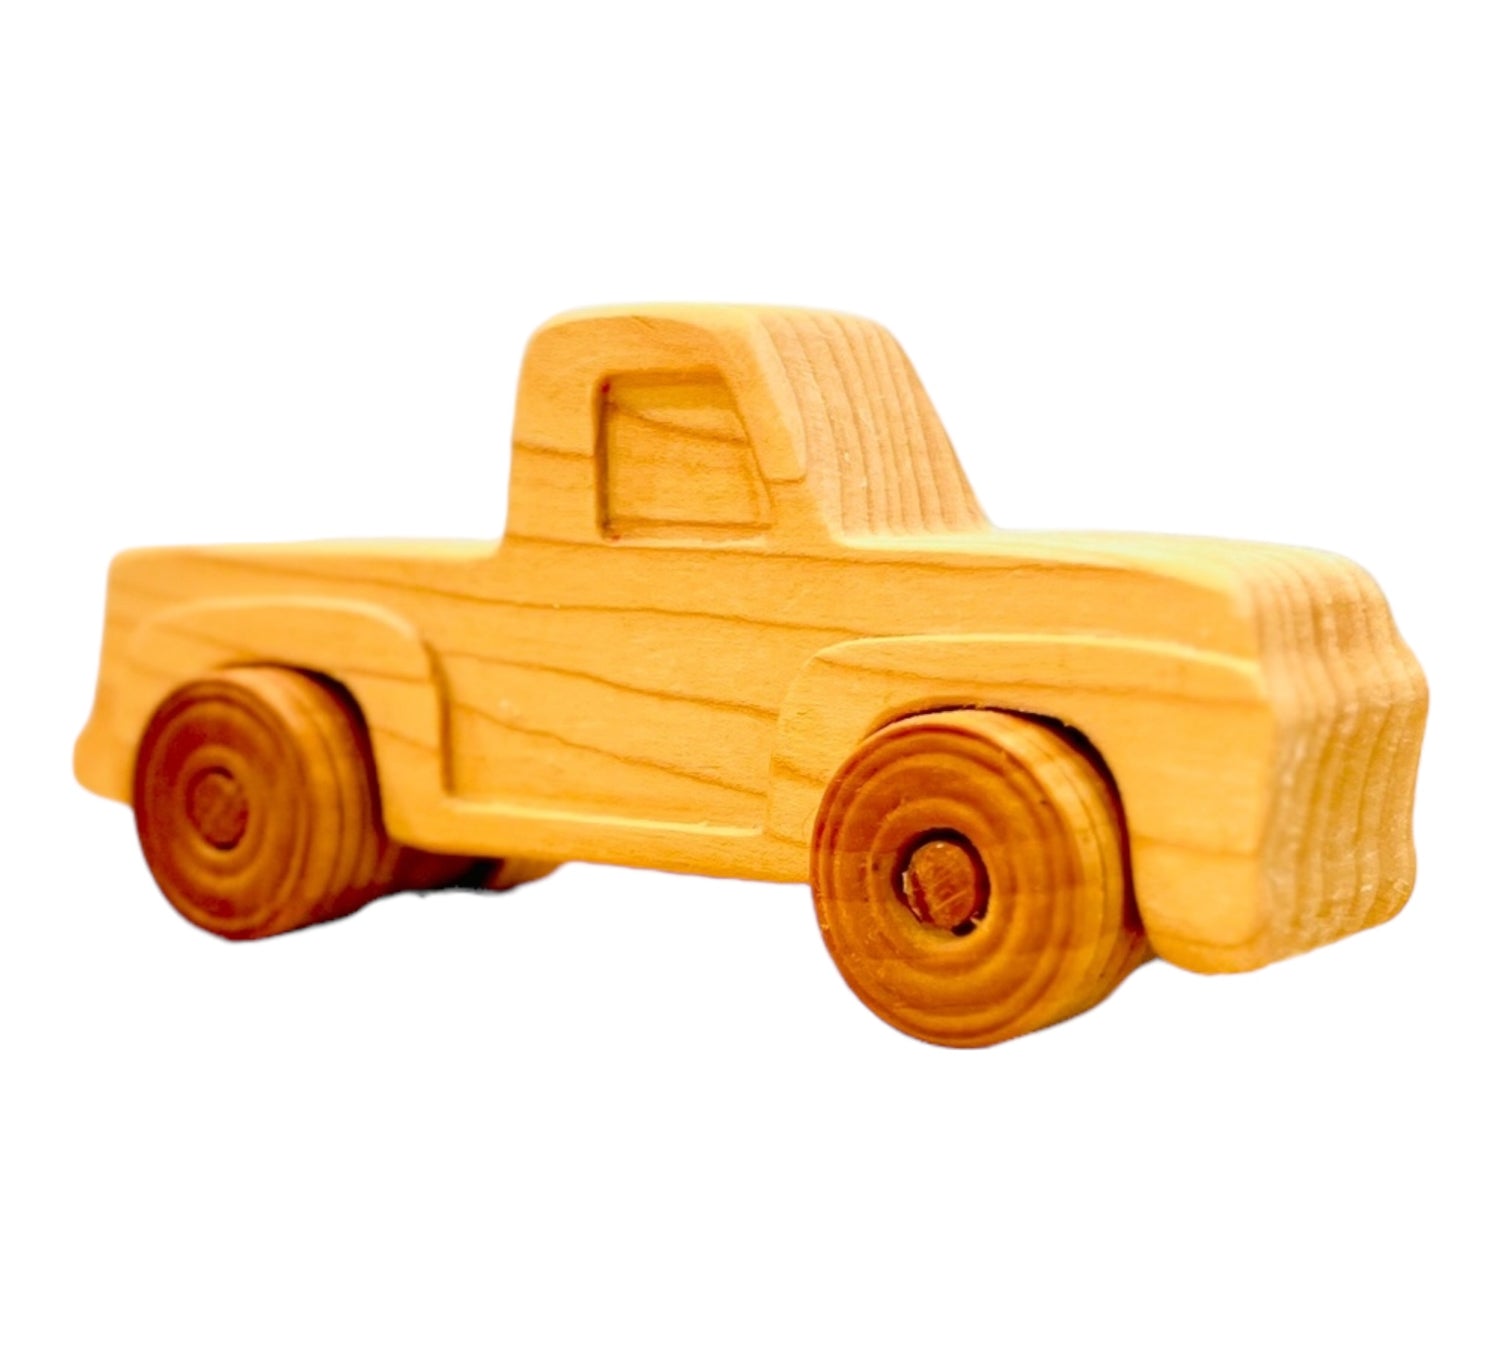 Wooden Toy - Classic Truck